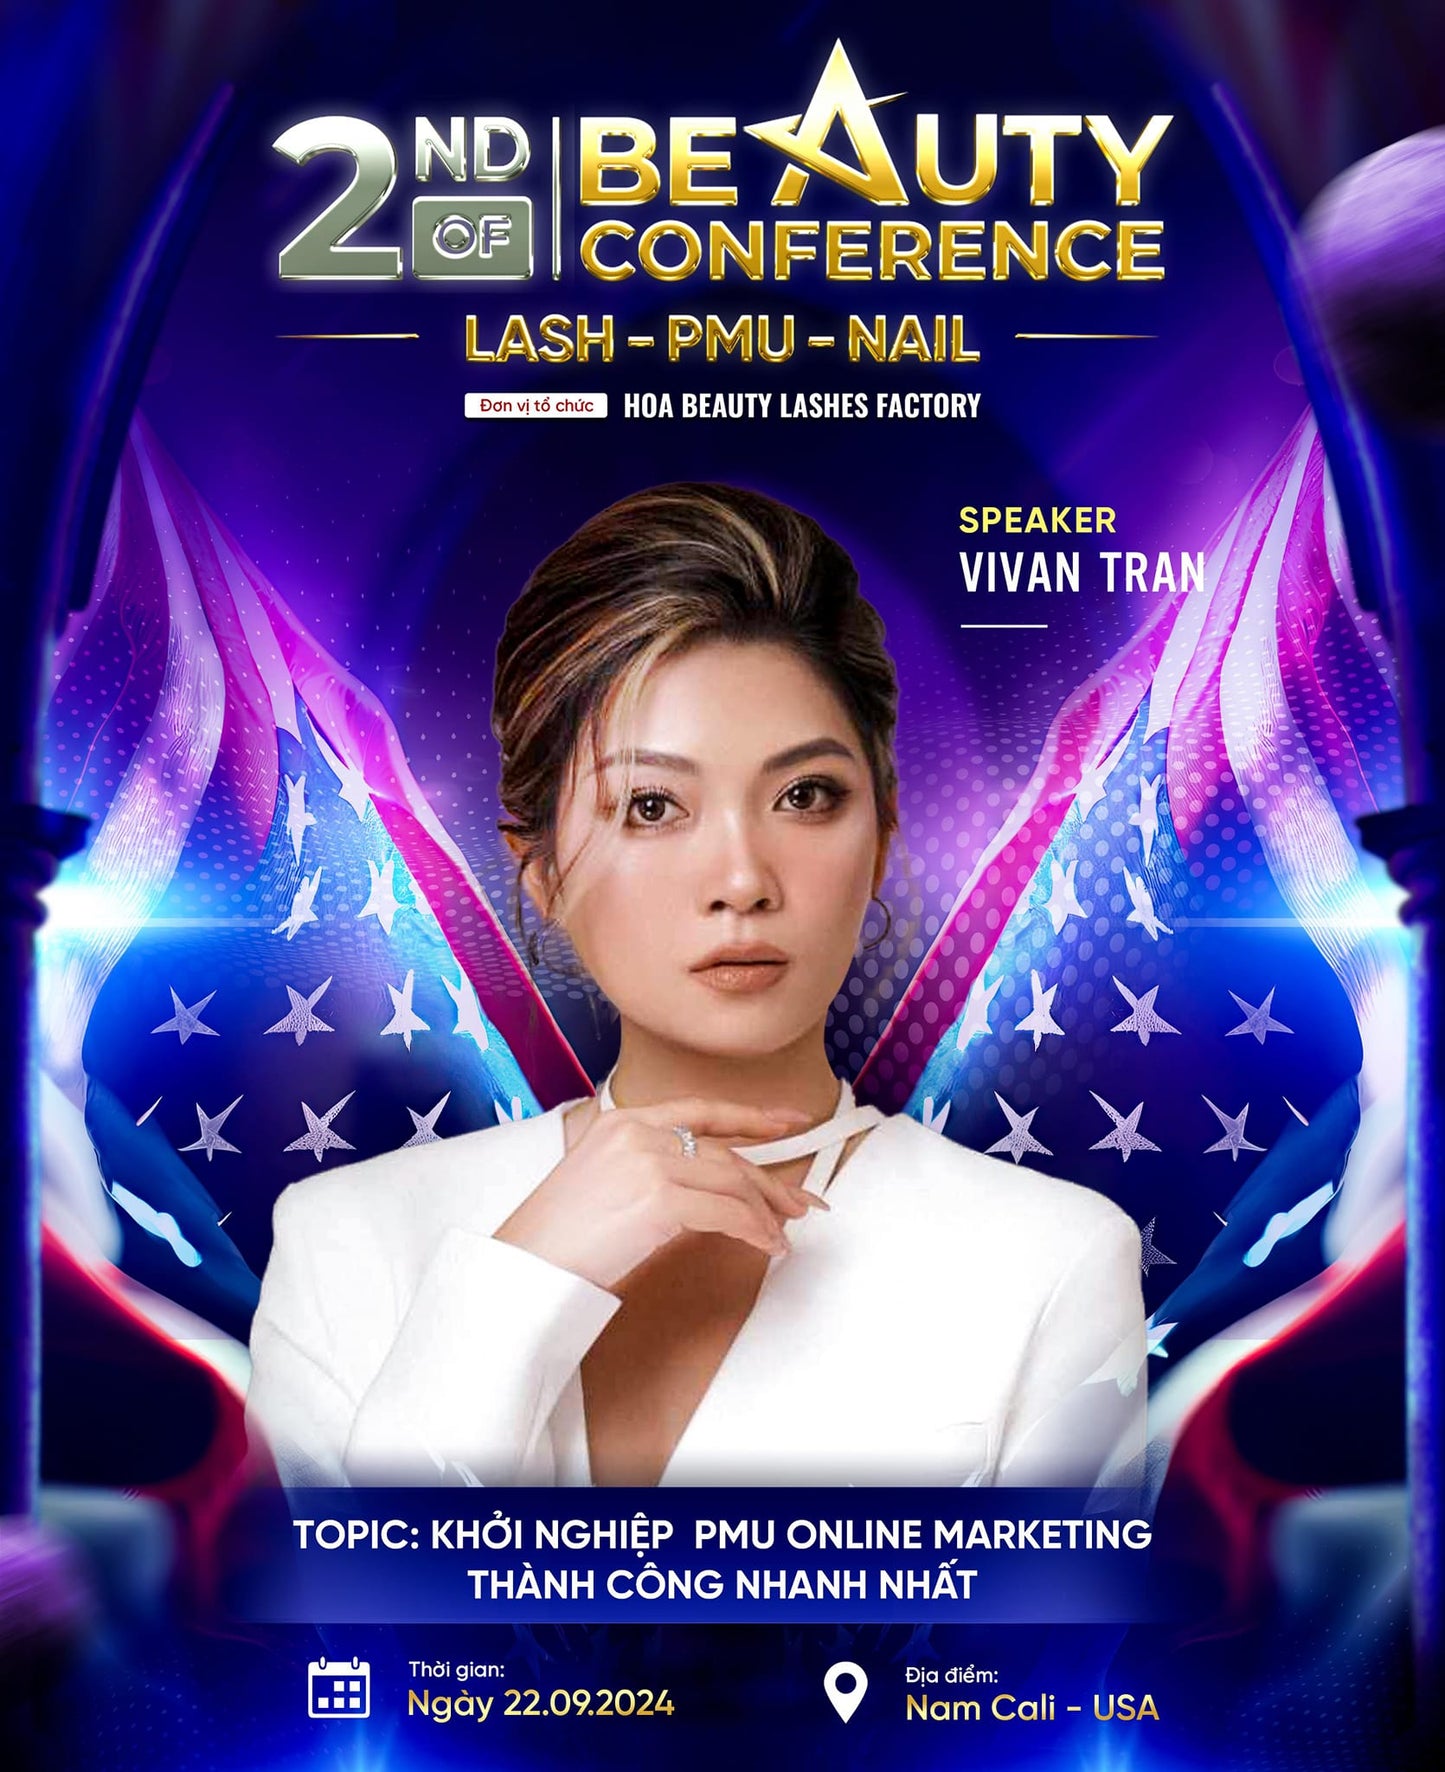 TICKET FOR CONFERENCE Nails - Lashes - P.M.U - Skincare in USA